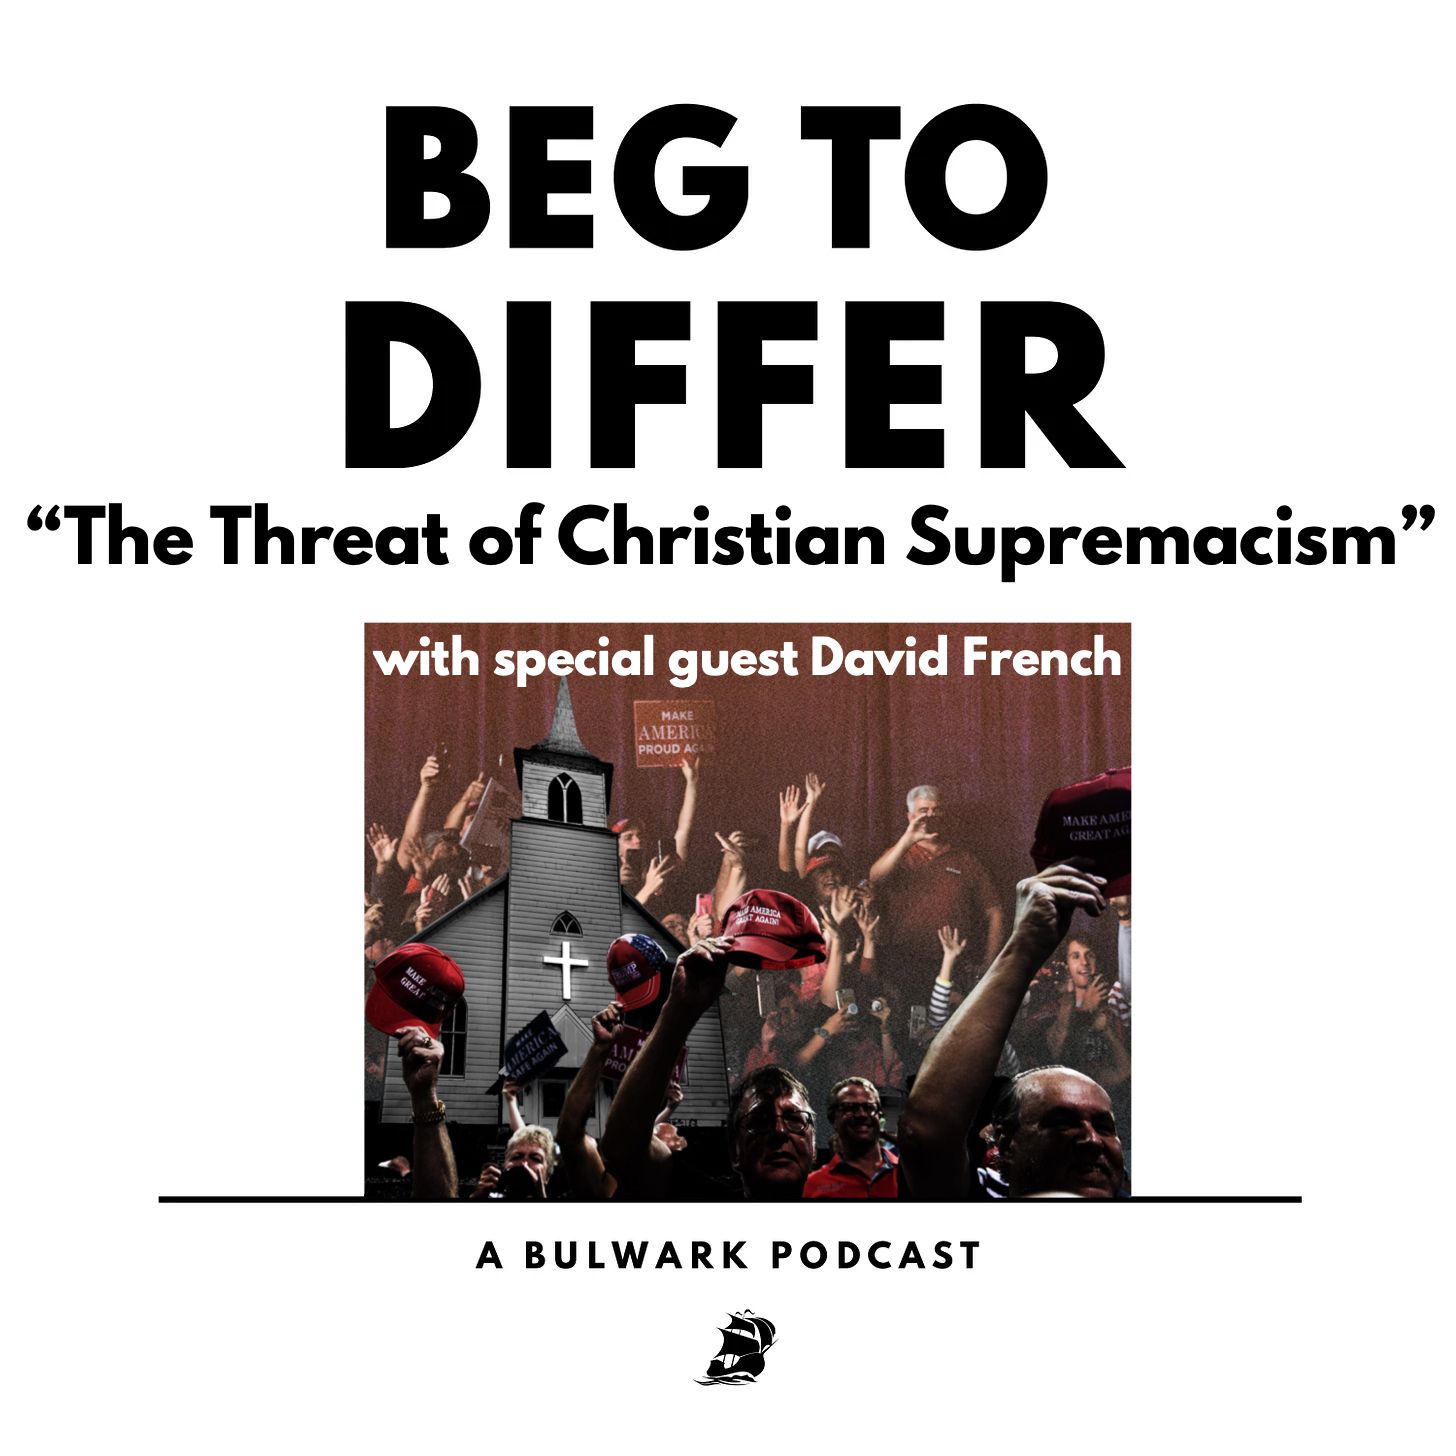 The Threat of Christian Supremacism